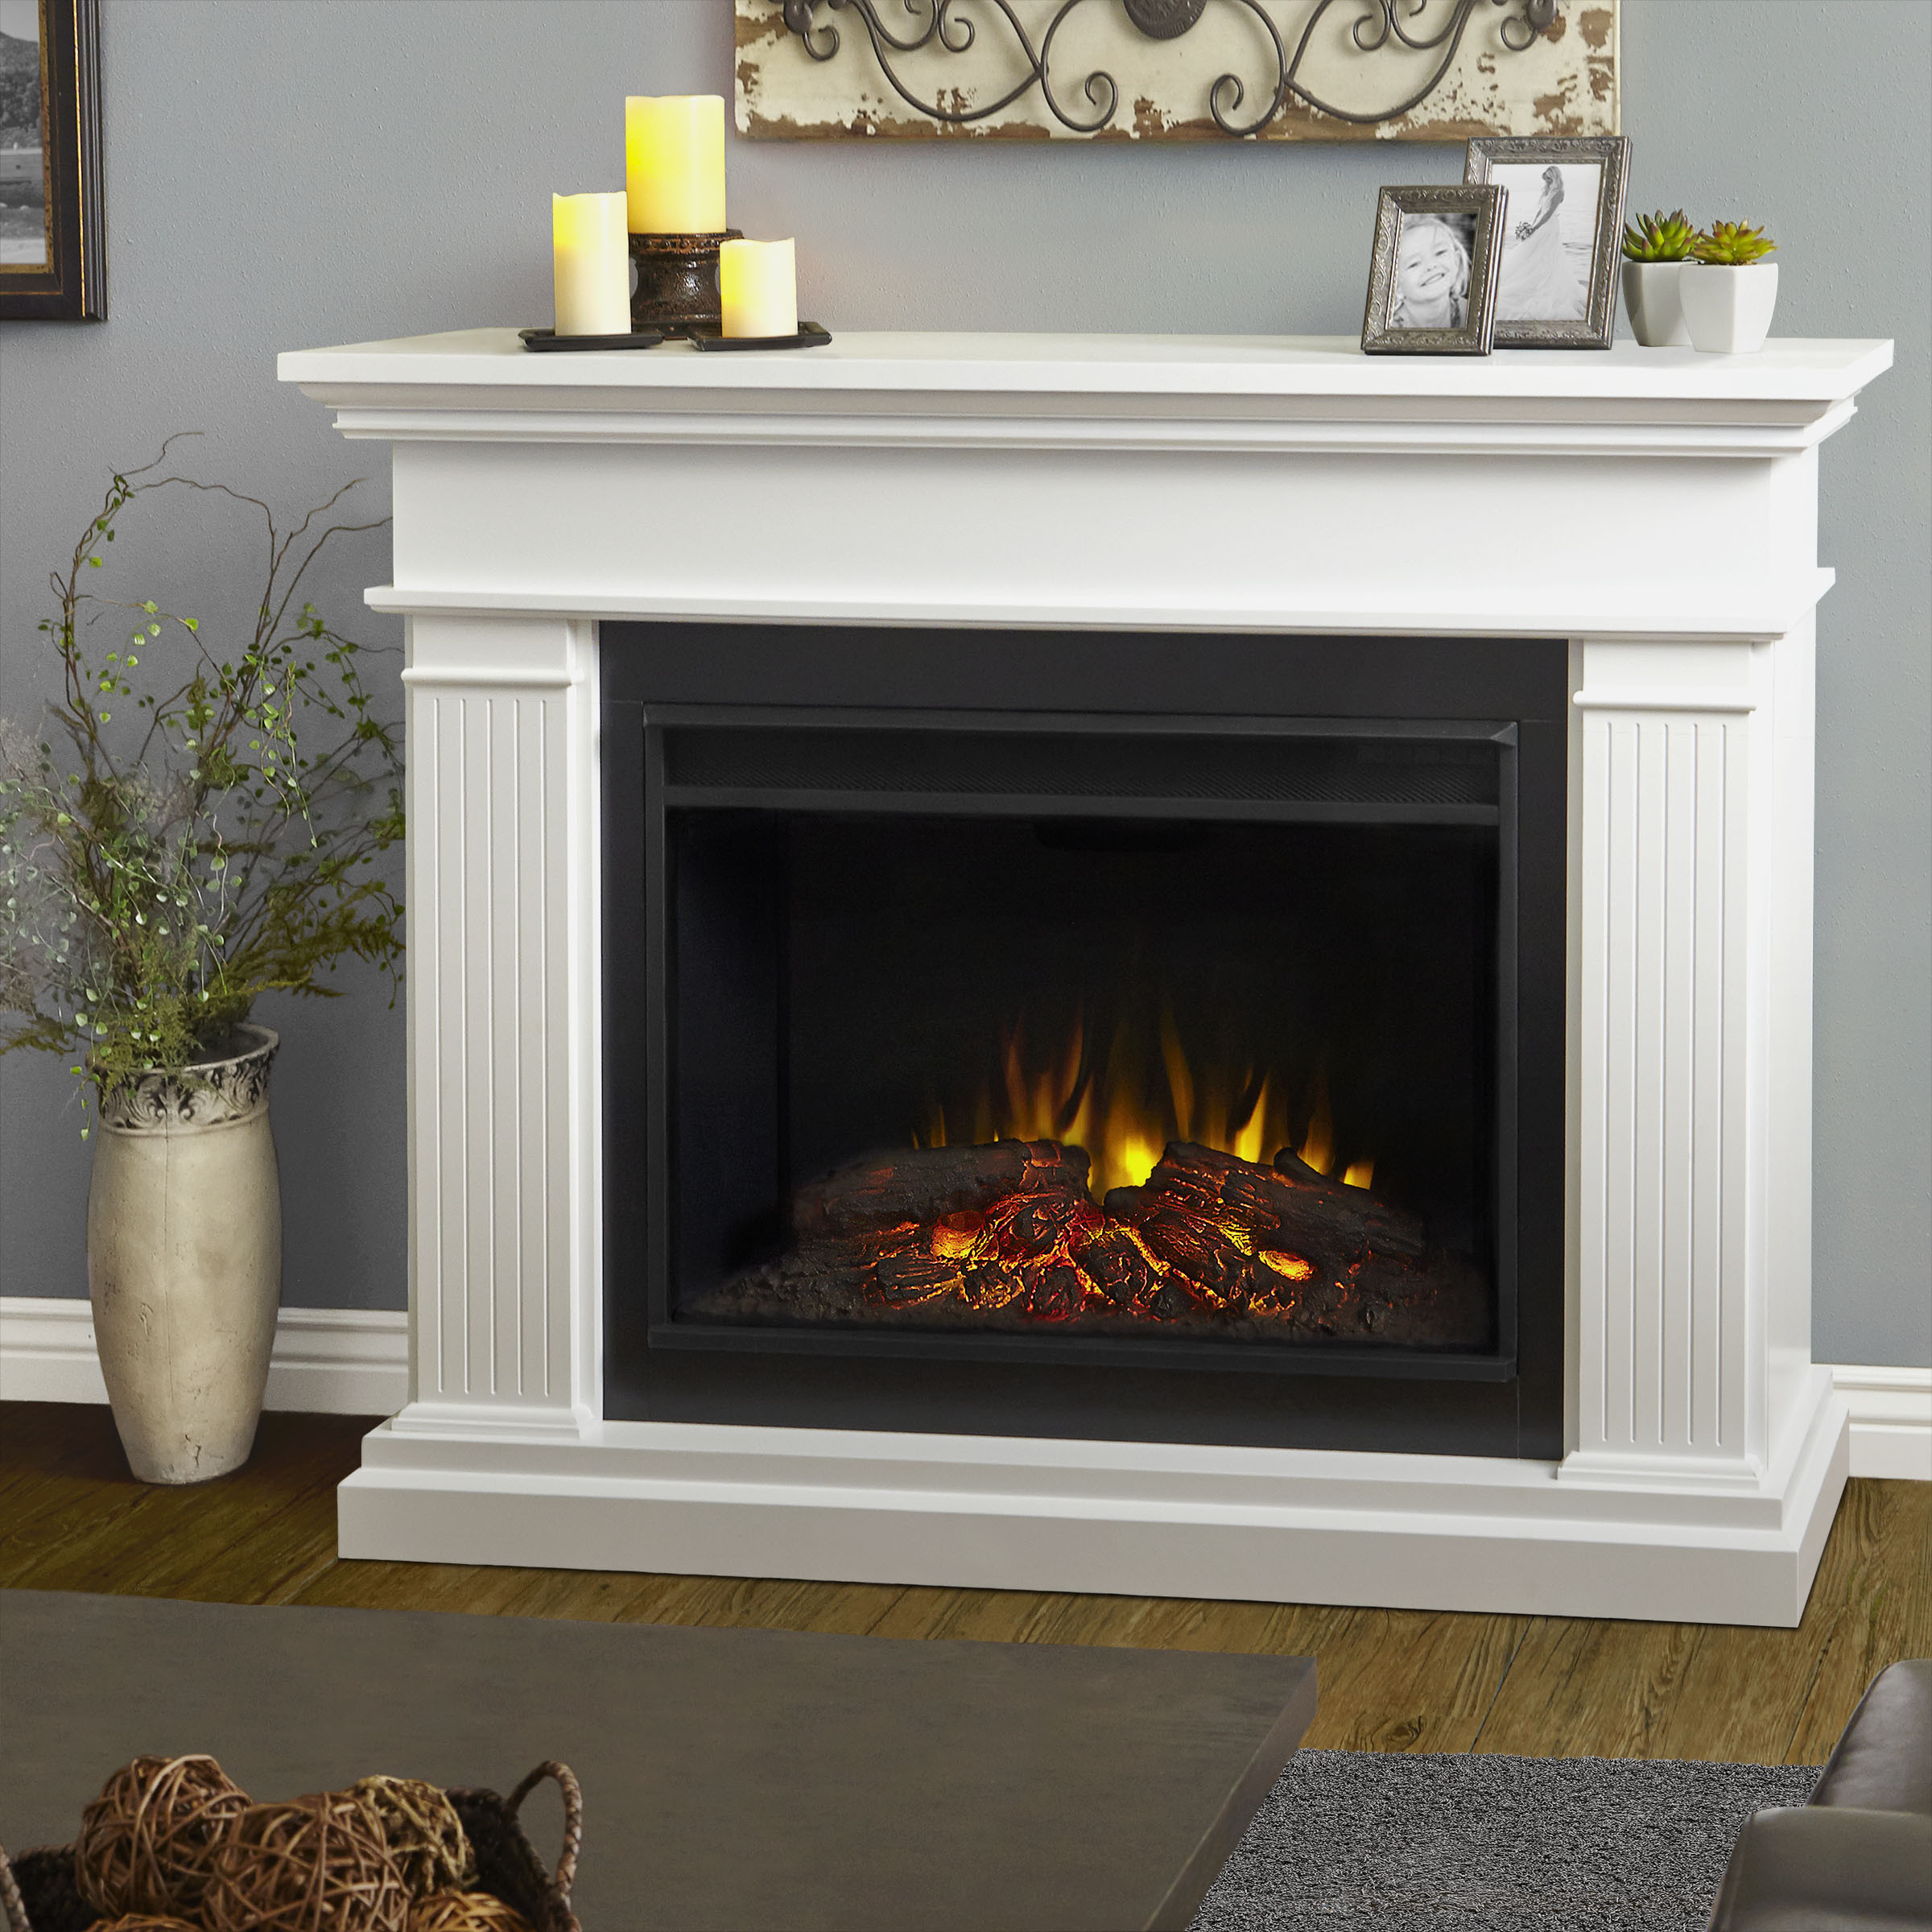 Grand White Electric Fireplace
 55 5" Kennedy Grand White Electric Fireplace